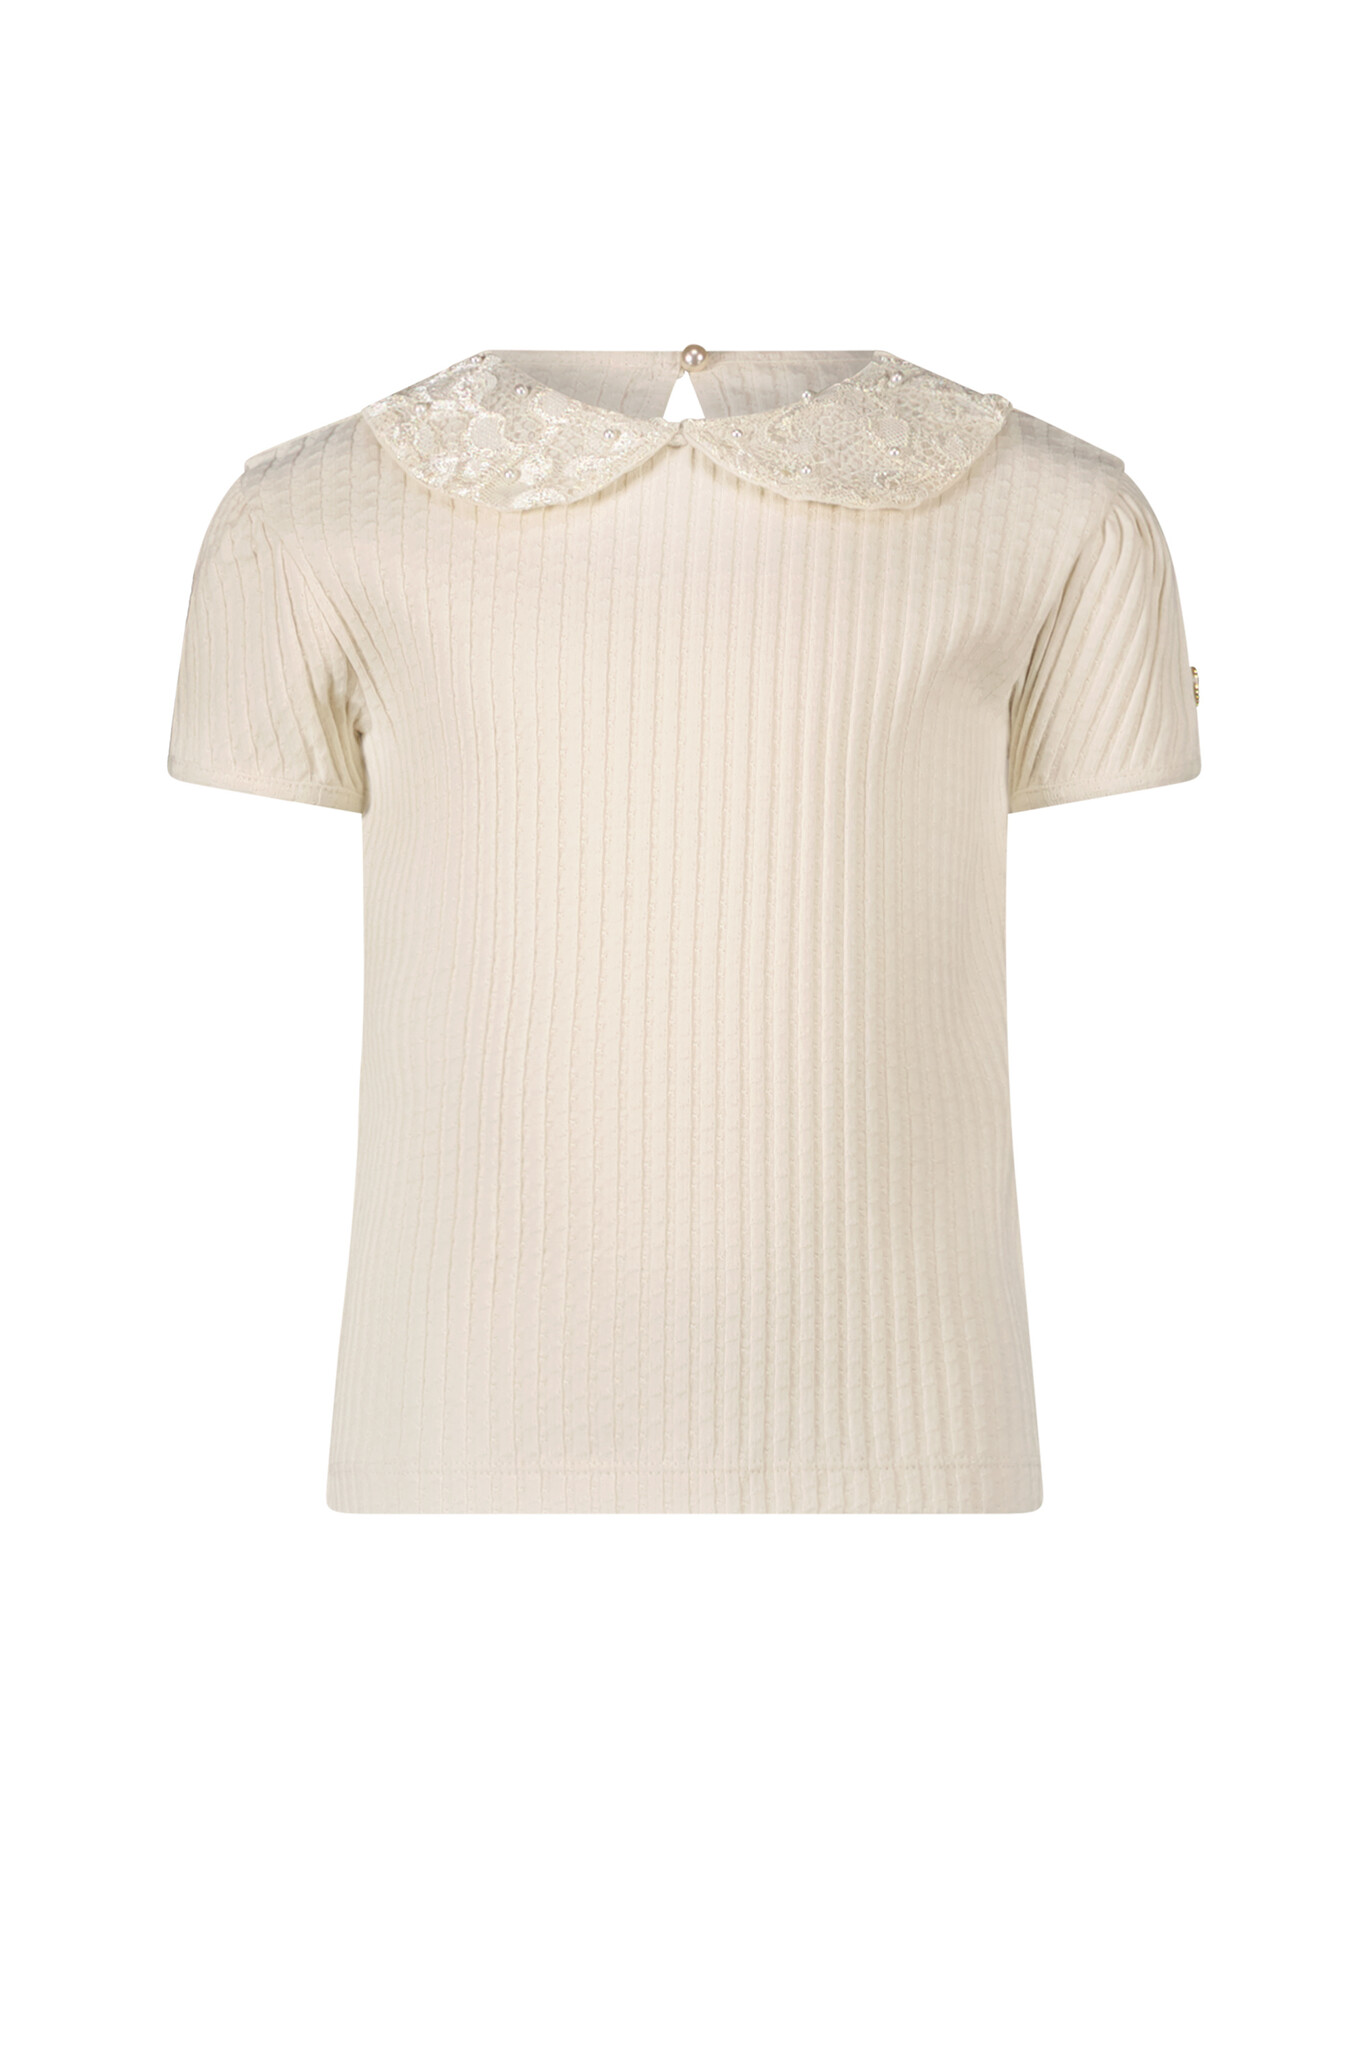 Le Chic Meisjes t-shirt - Narly - Oatmeal Elite